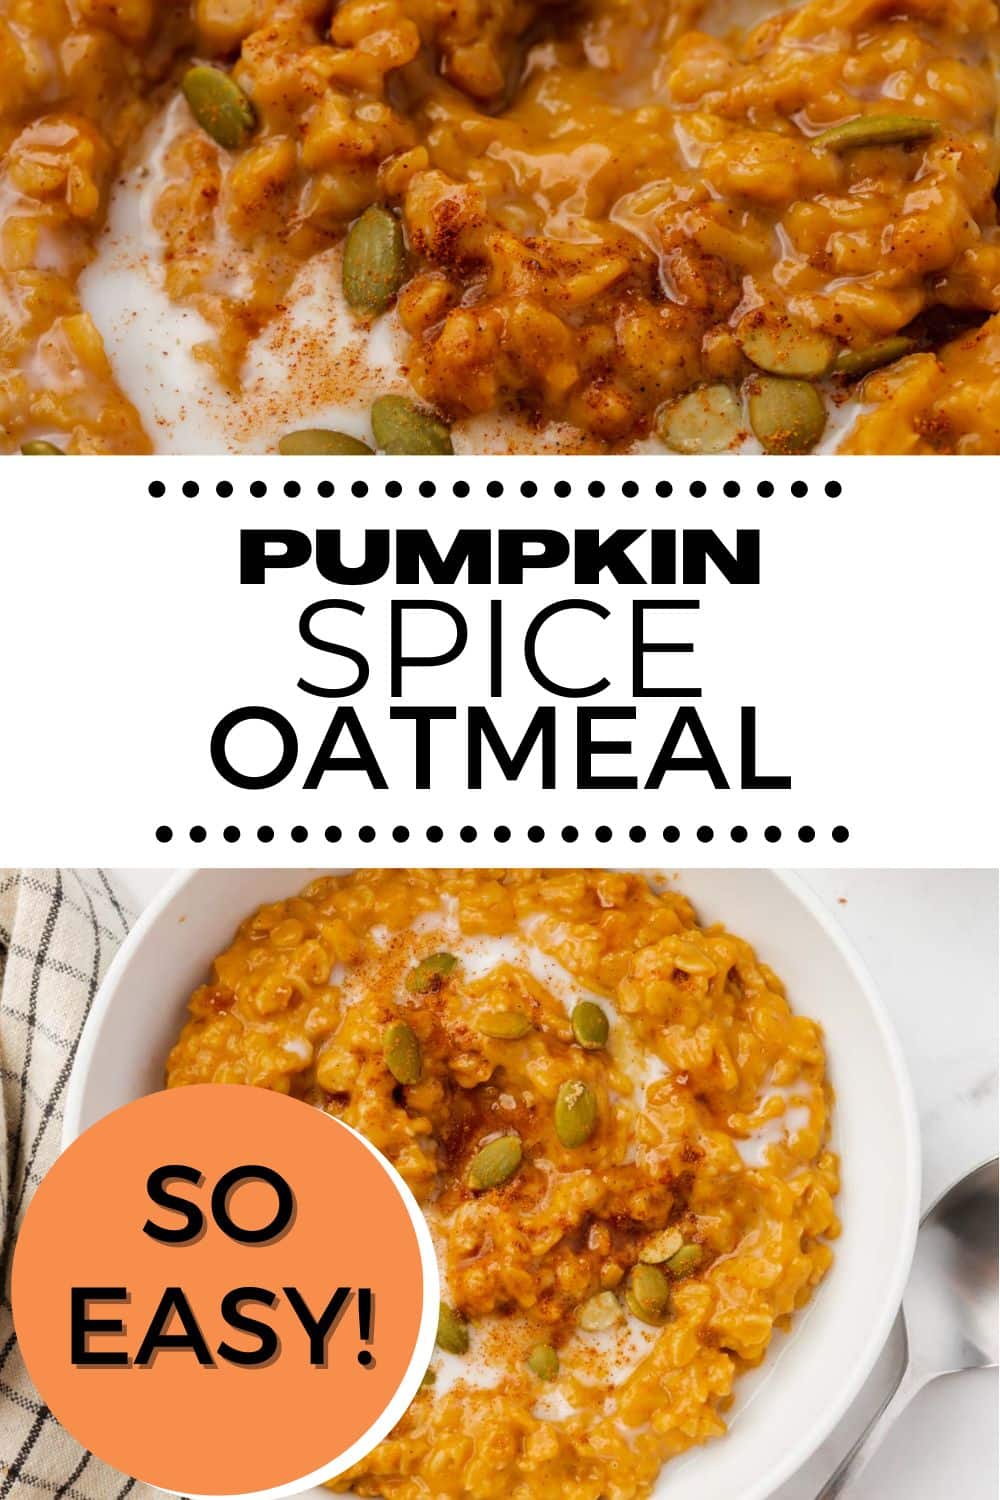 Enjoy a hearty pumpkin-spiced breakfast, cooked in under 10 minutes, using this easy recipe for Pumpkin Spice Oatmeal with real pumpkin and delicious flavors.